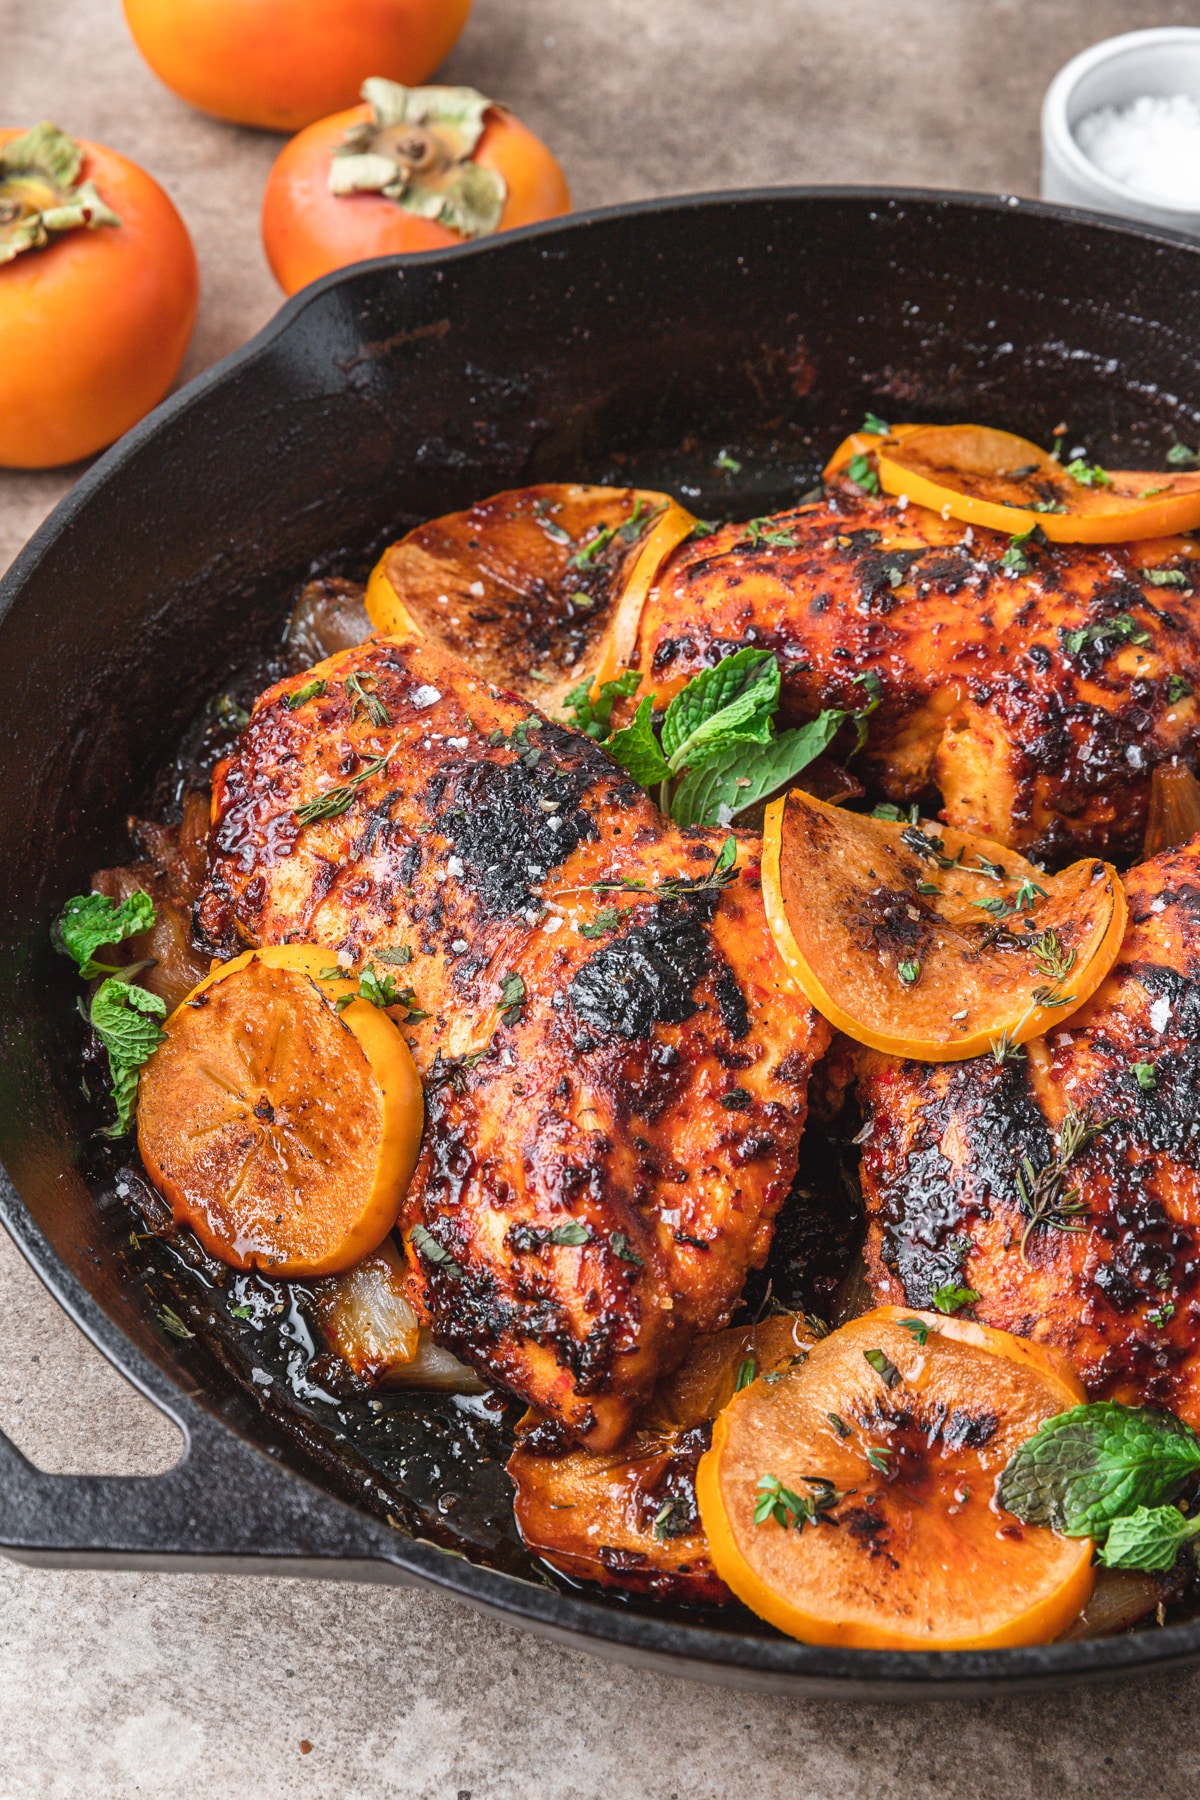 harissa roasted chicken with fuyu persimmons.